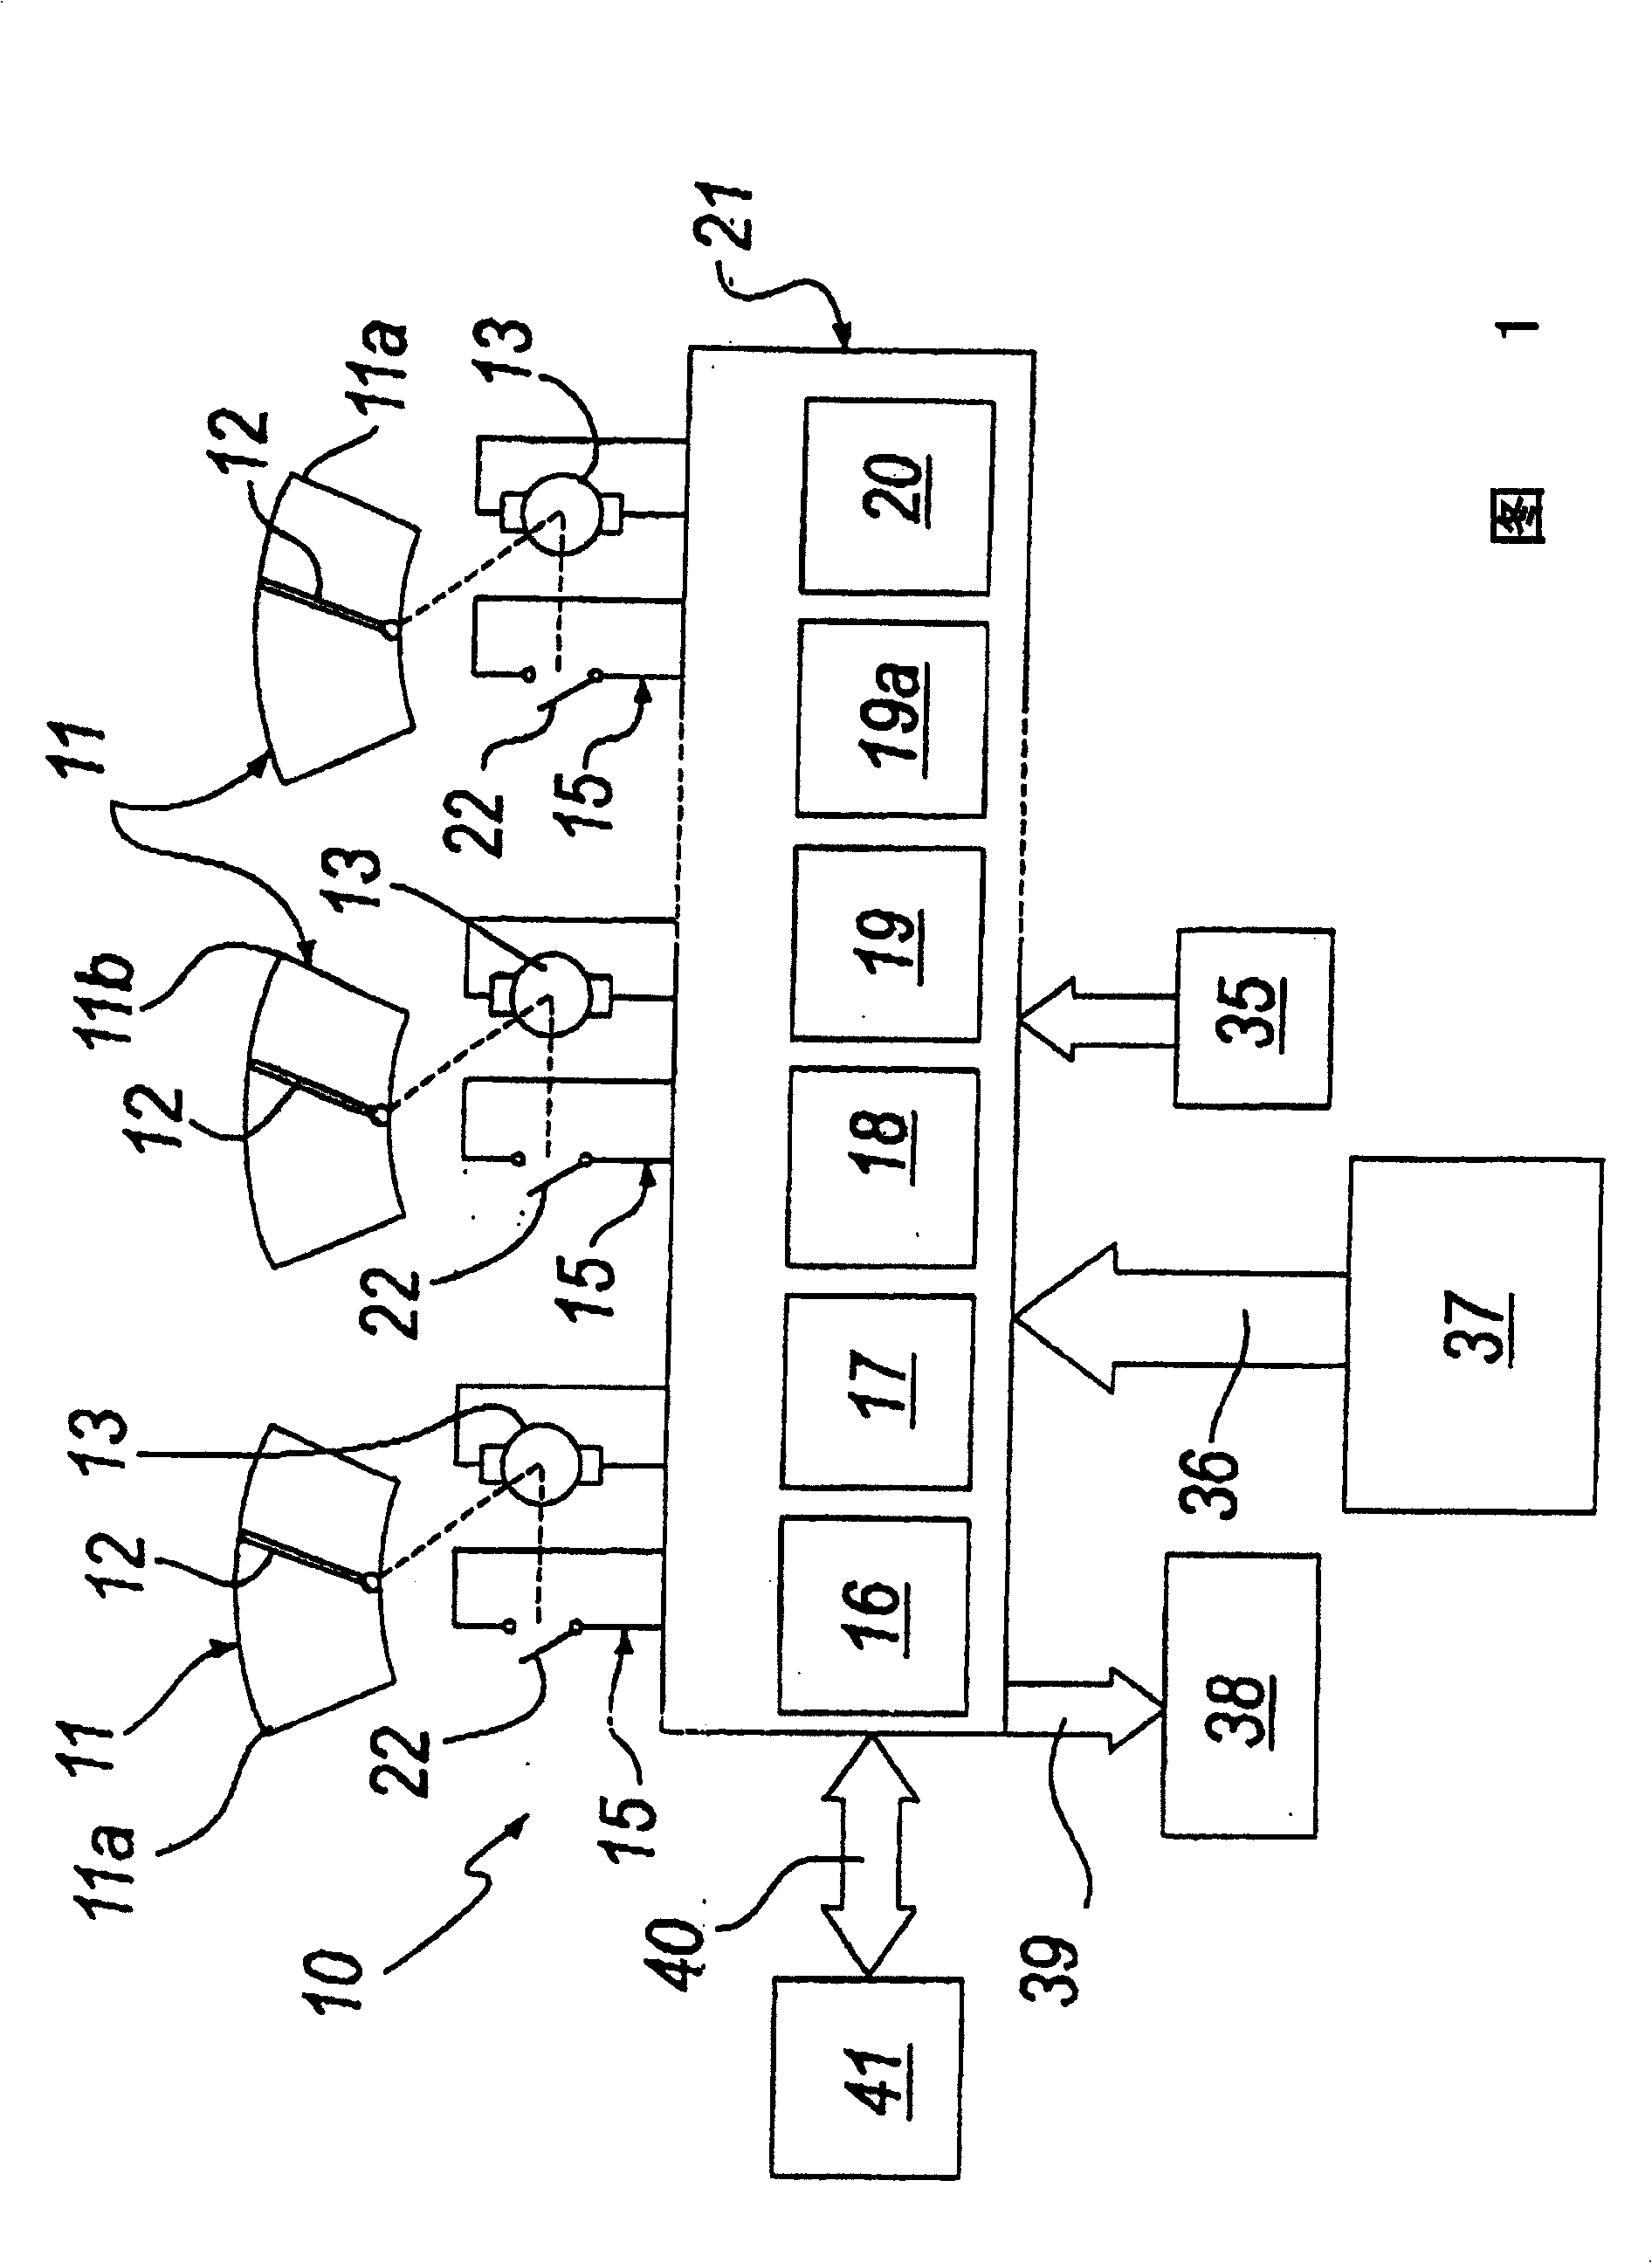 Synchronization device particularly for at least two windshield wipers